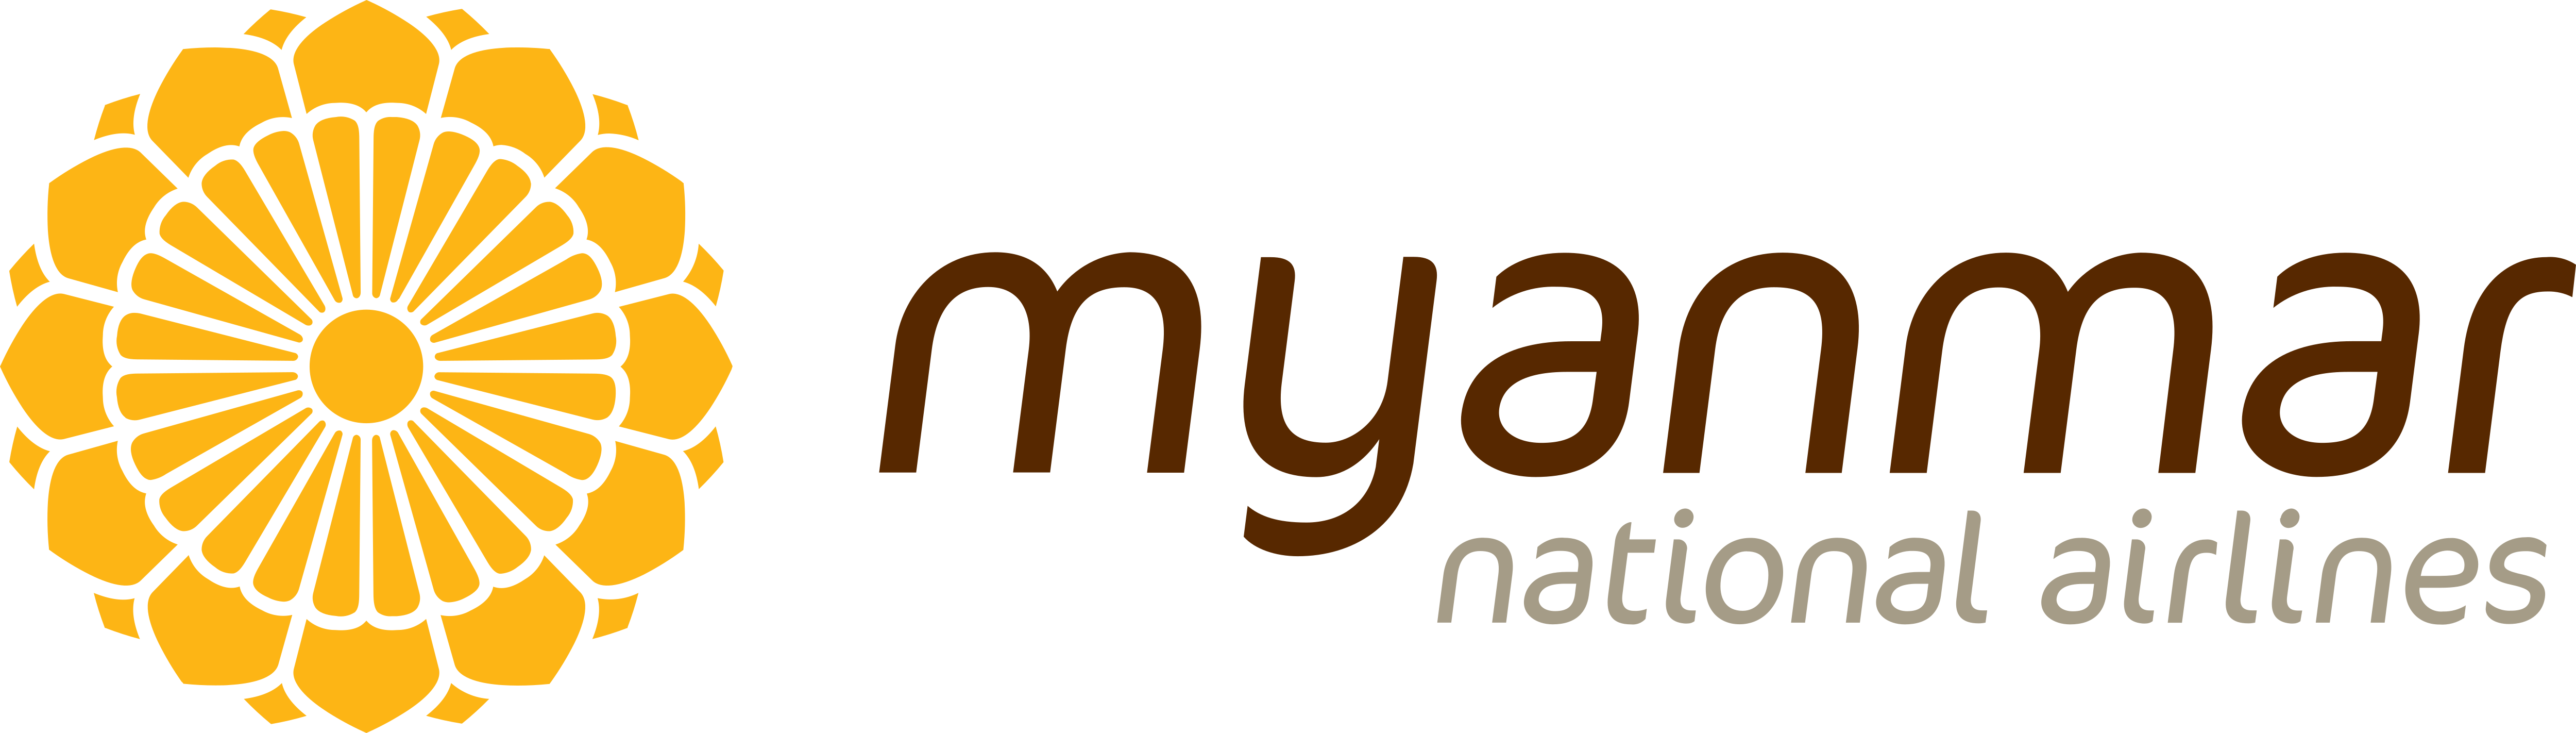 National Airlines Logo - Myanmar National Airlines – Logos Download